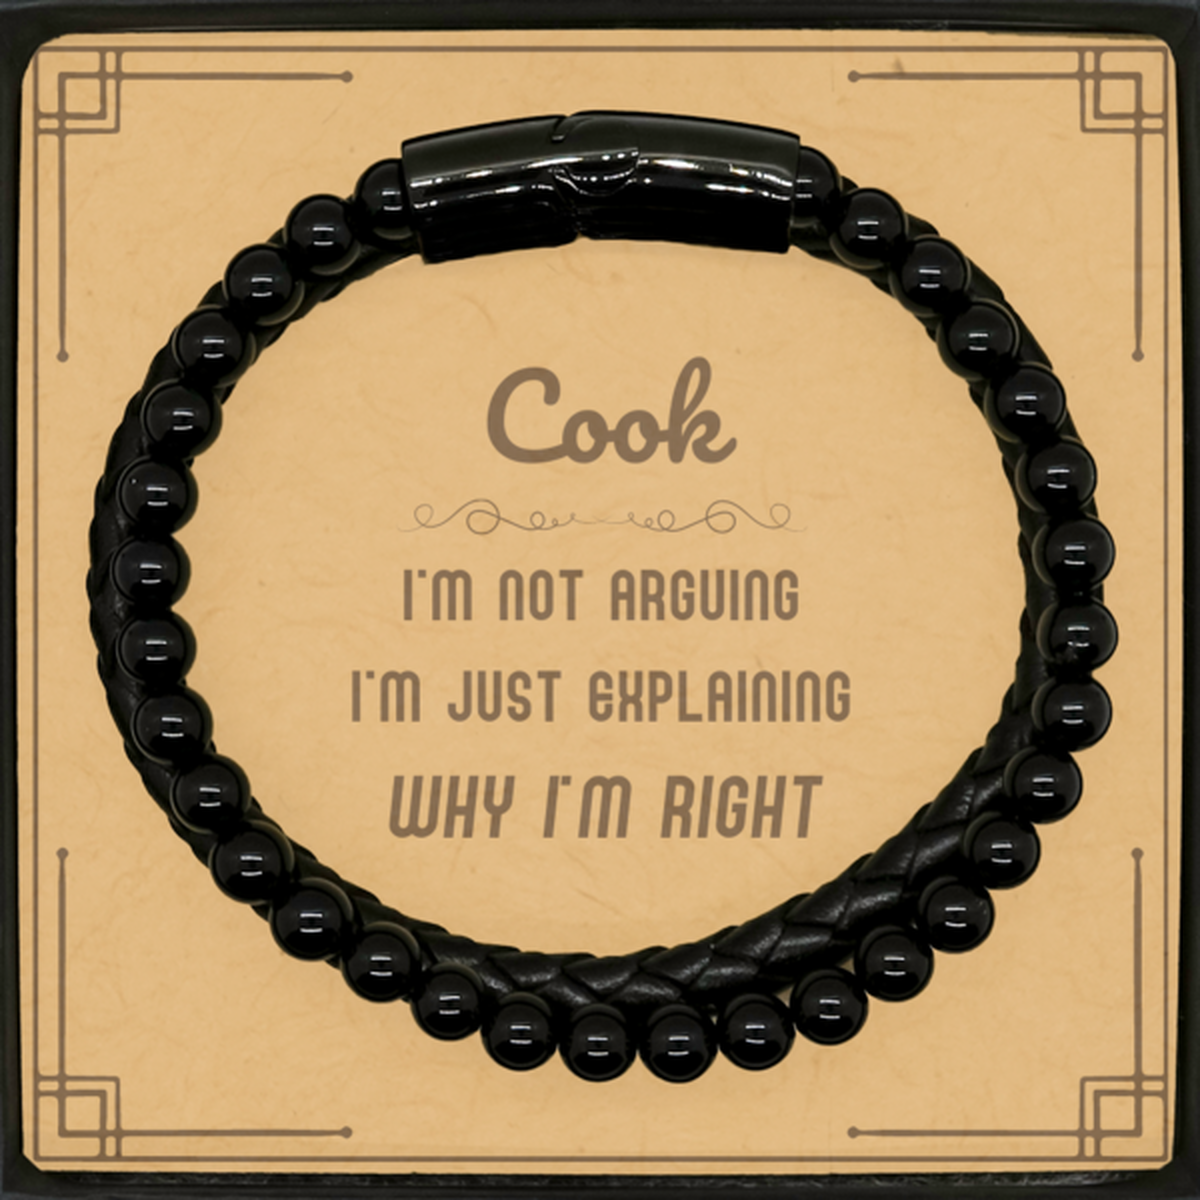 Cook I'm not Arguing. I'm Just Explaining Why I'm RIGHT Stone Leather Bracelets, Funny Saying Quote Cook Gifts For Cook Message Card Graduation Birthday Christmas Gifts for Men Women Coworker